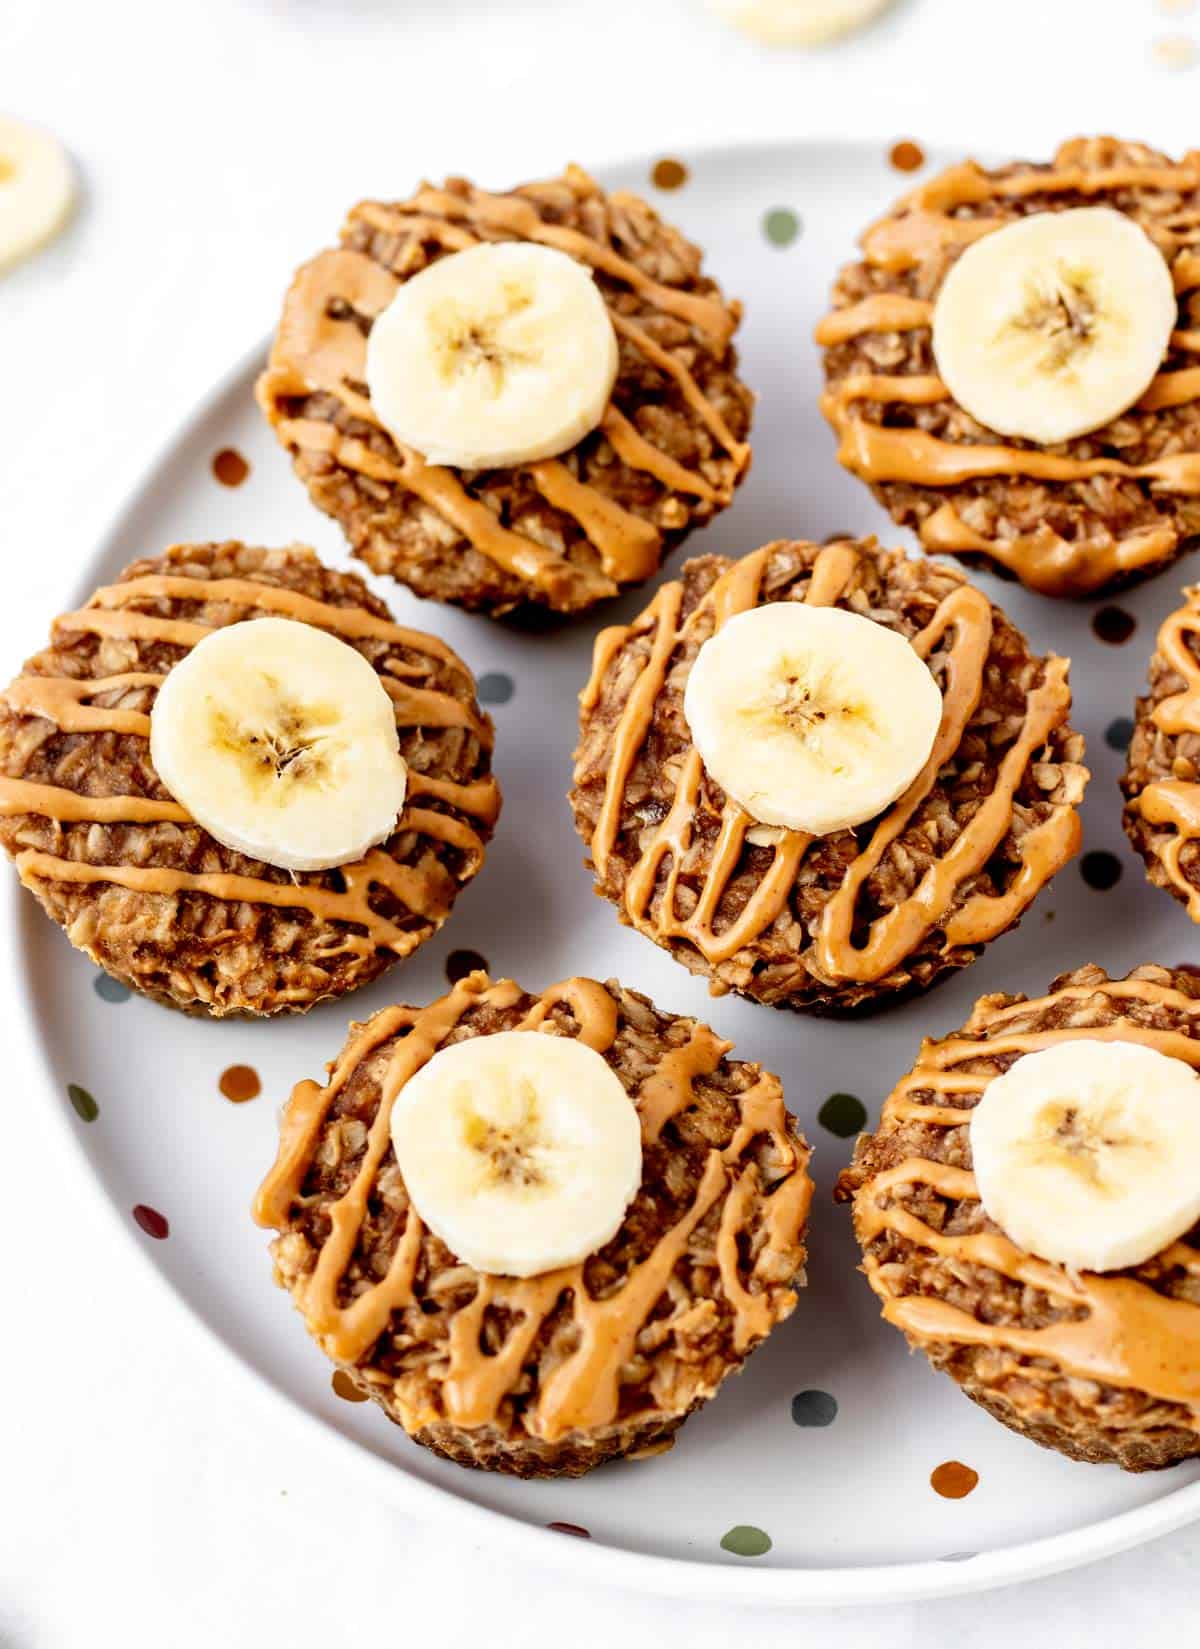 A plate of 3 ingredient banana muffins topped with peanut butter and banana slices.